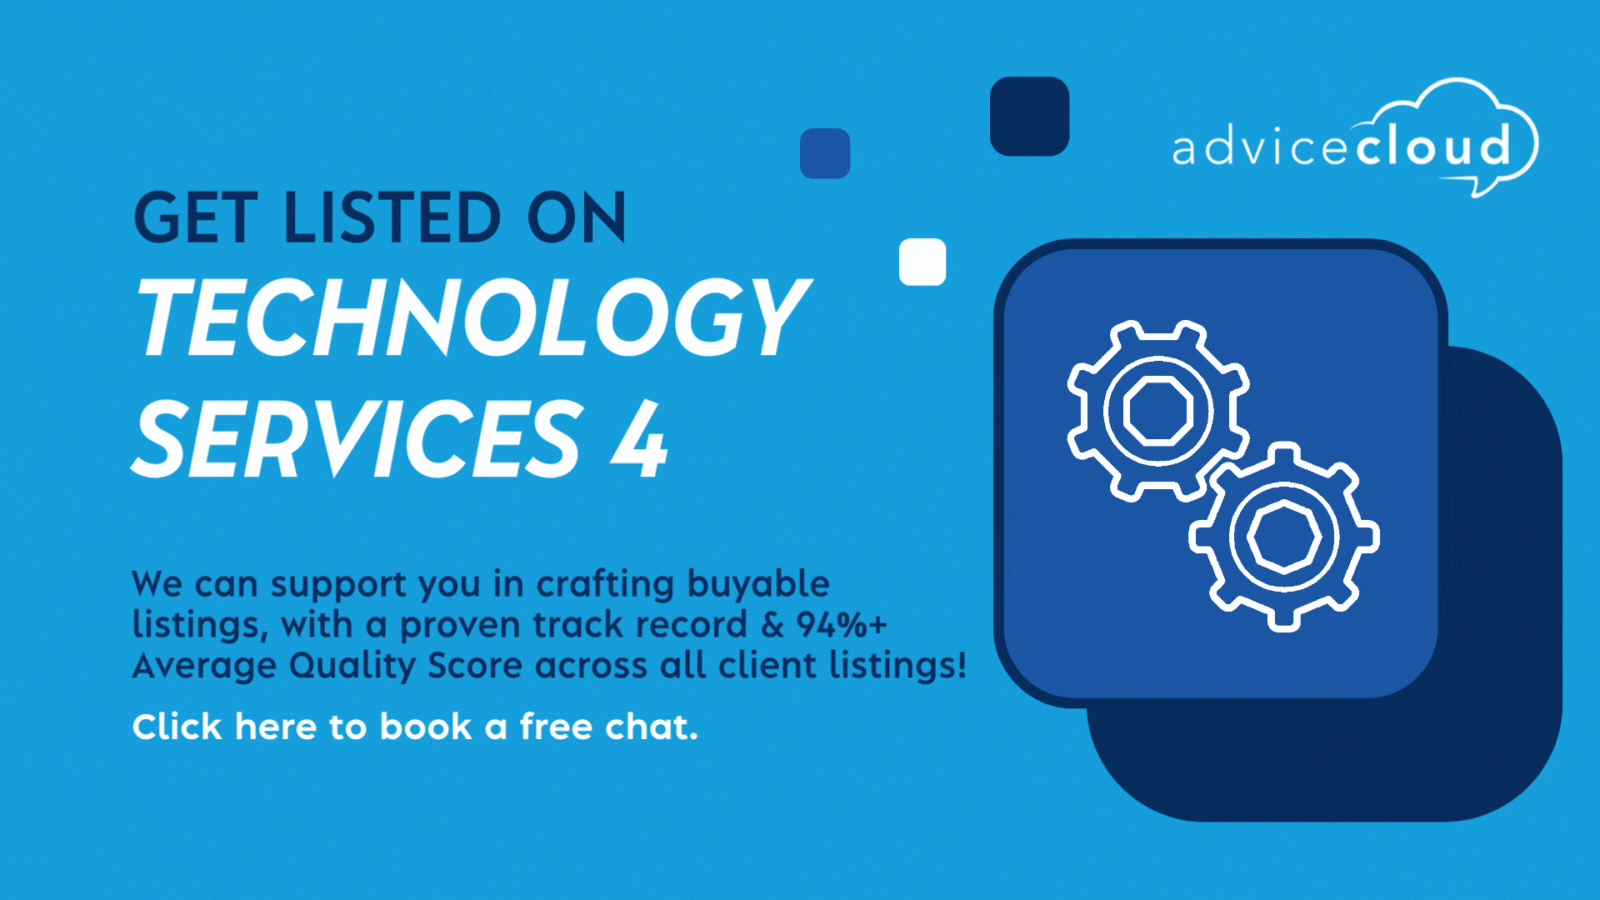 Clickable graphic directing users to a calendar link to book a free 25-minute chat with one of our experts about how we can help get you listed on Technology Services 4.